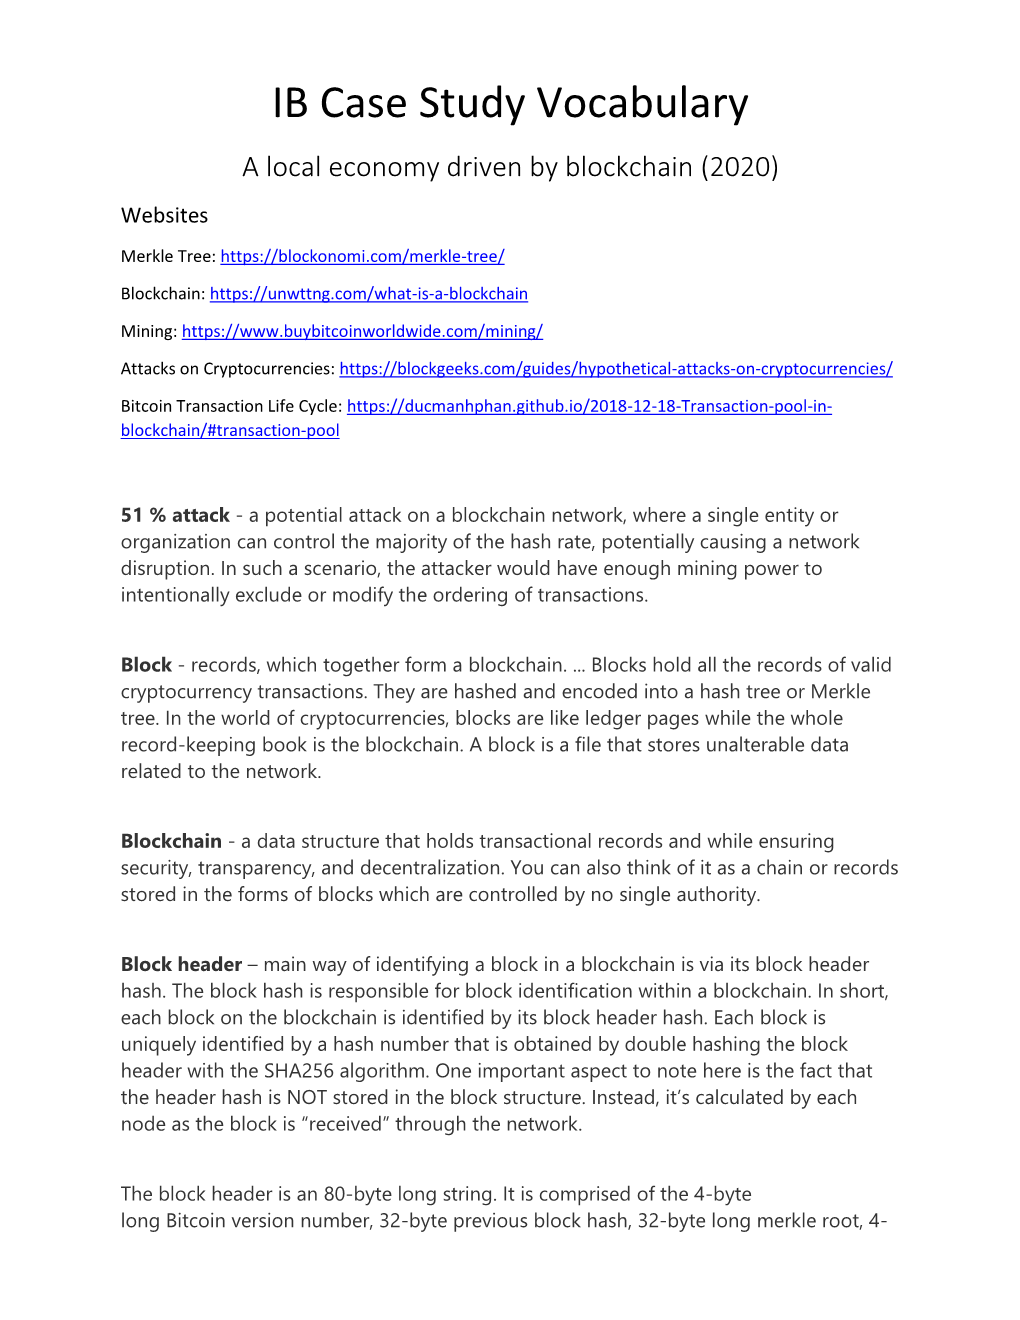 IB Case Study Vocabulary a Local Economy Driven by Blockchain (2020) Websites